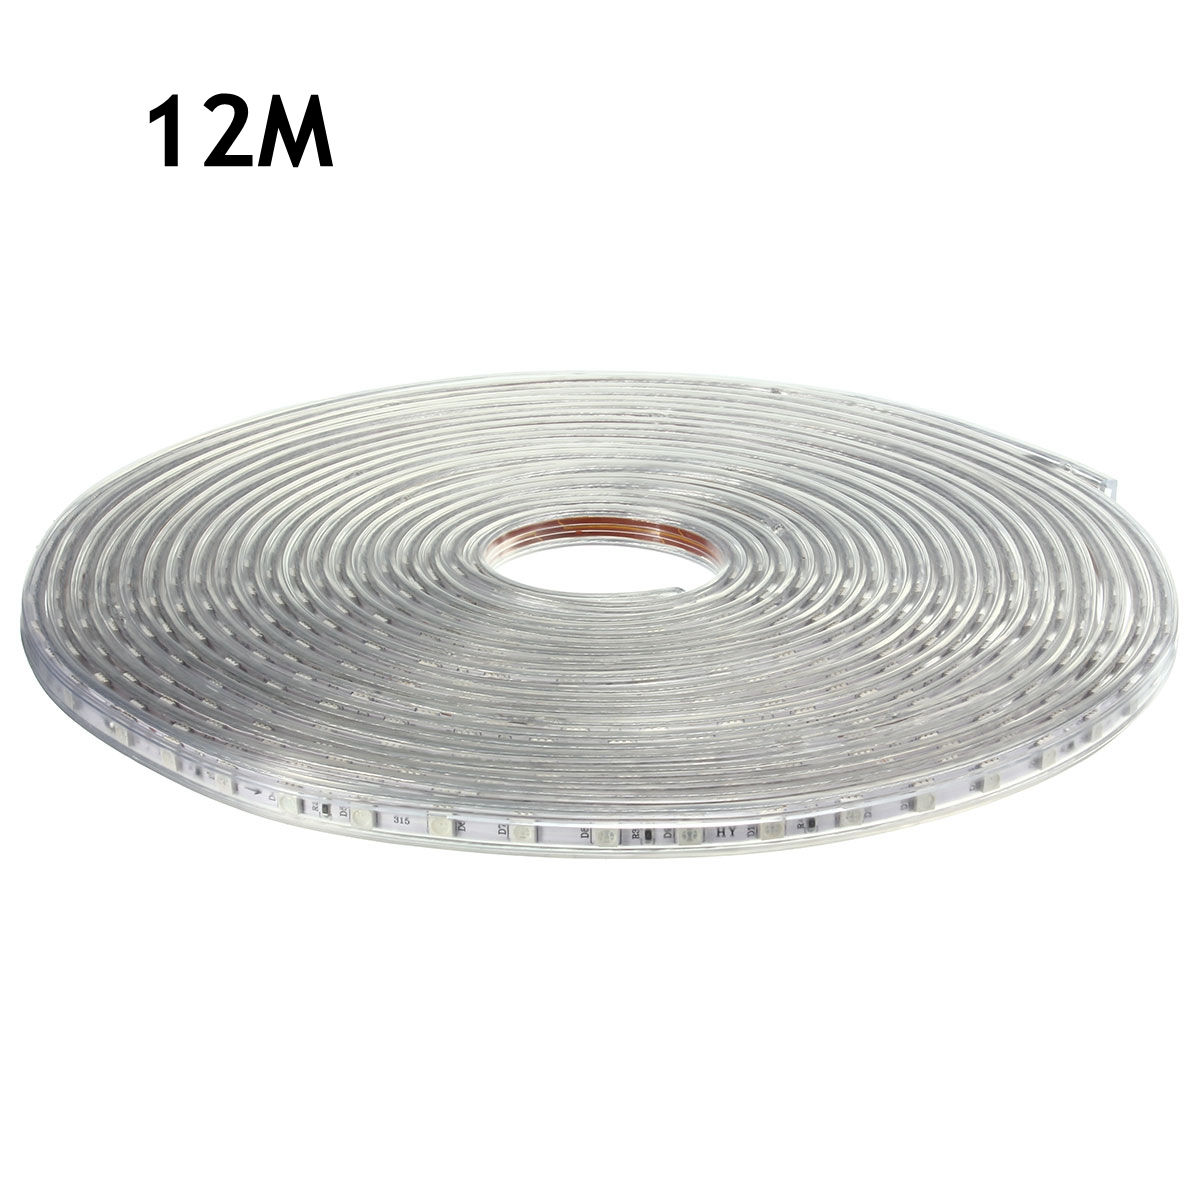 220V-12M-5050-LED-SMD-Outdoor-Waterproof-Flexible-Tape-Rope-Strip-Light-Xmas-1066370-2